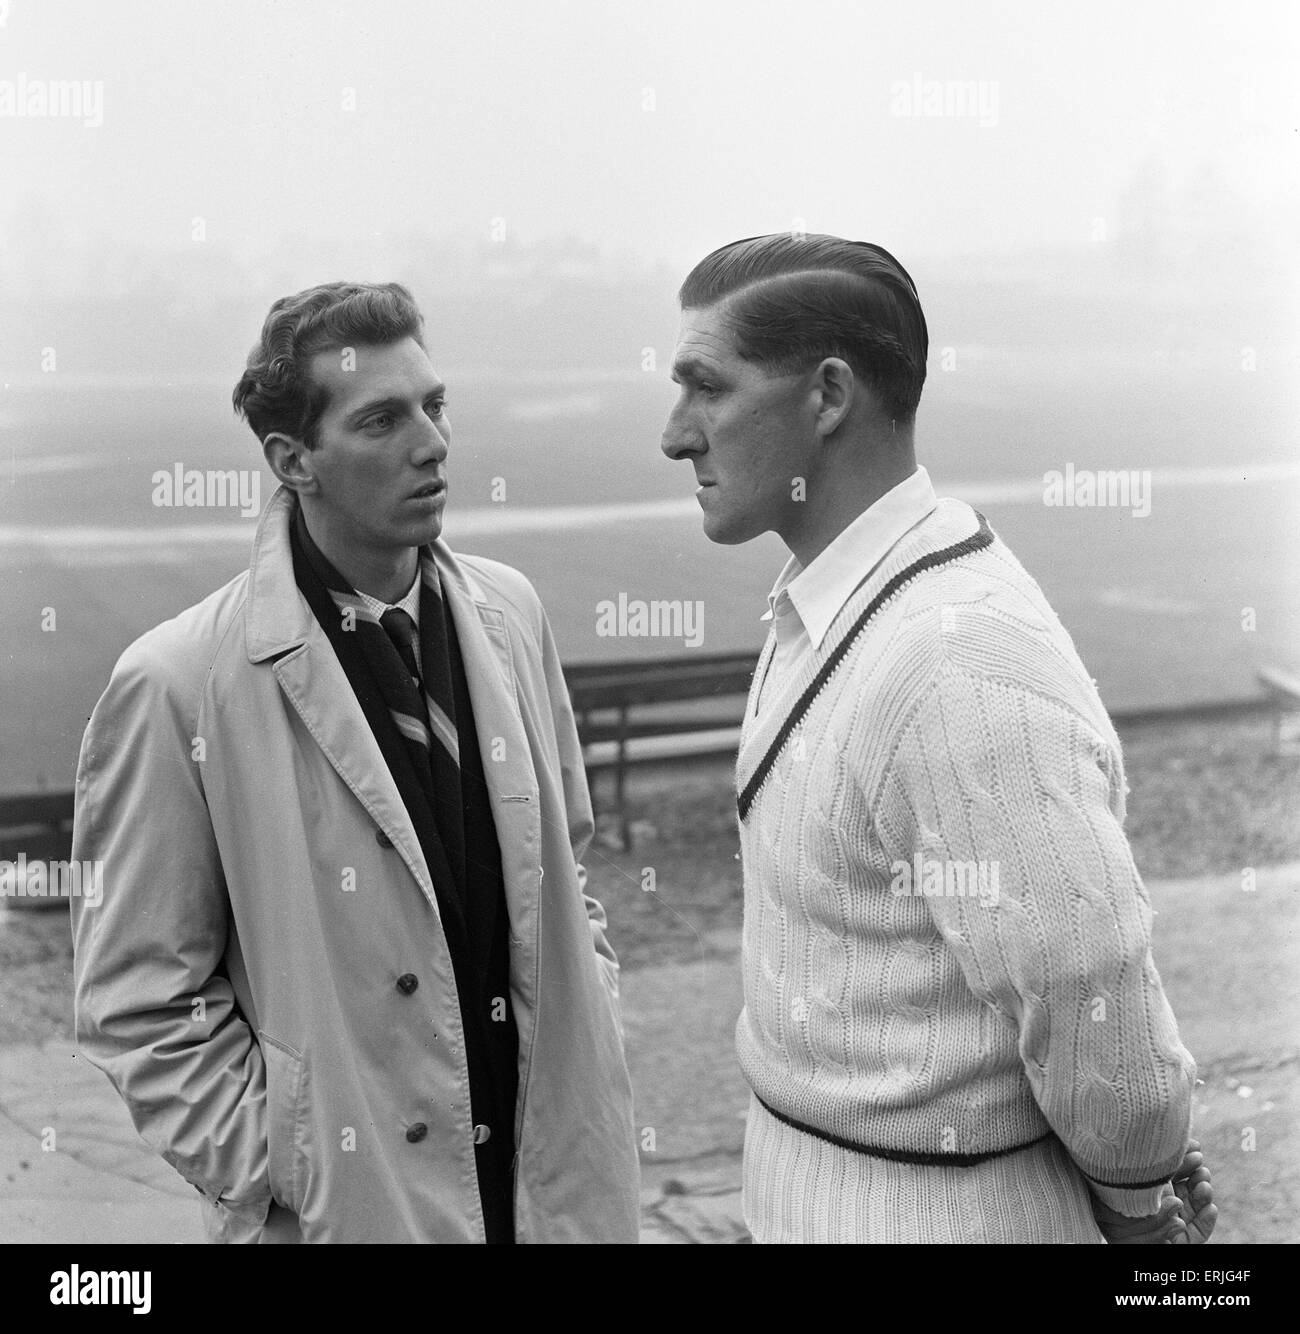 Yorkshire County Cricket Club, players head to the nets with snow still on the ground, 5th April 1961. Don Wilson, back from tour, chats with skipper Vc Wilson. Stock Photo